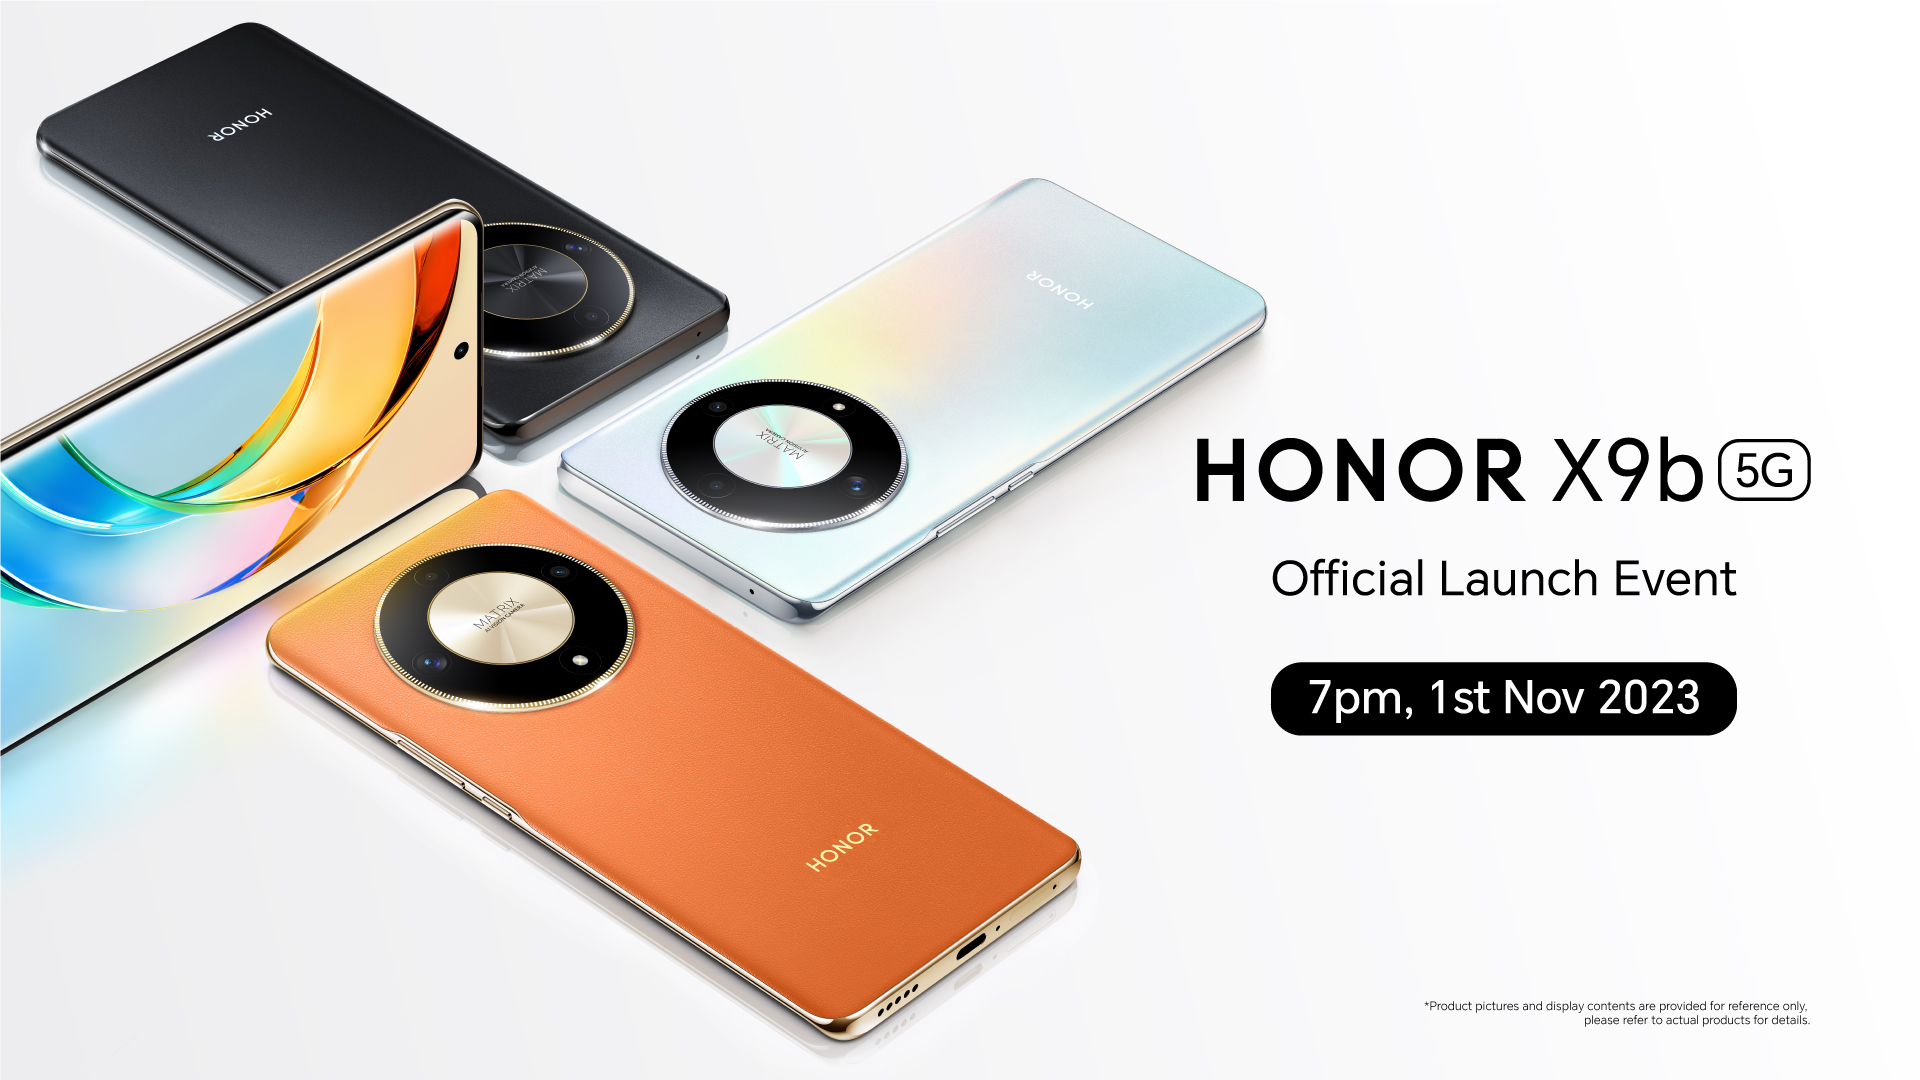 The HONOR X9b 5G Early bird promo is here You can reserve the new